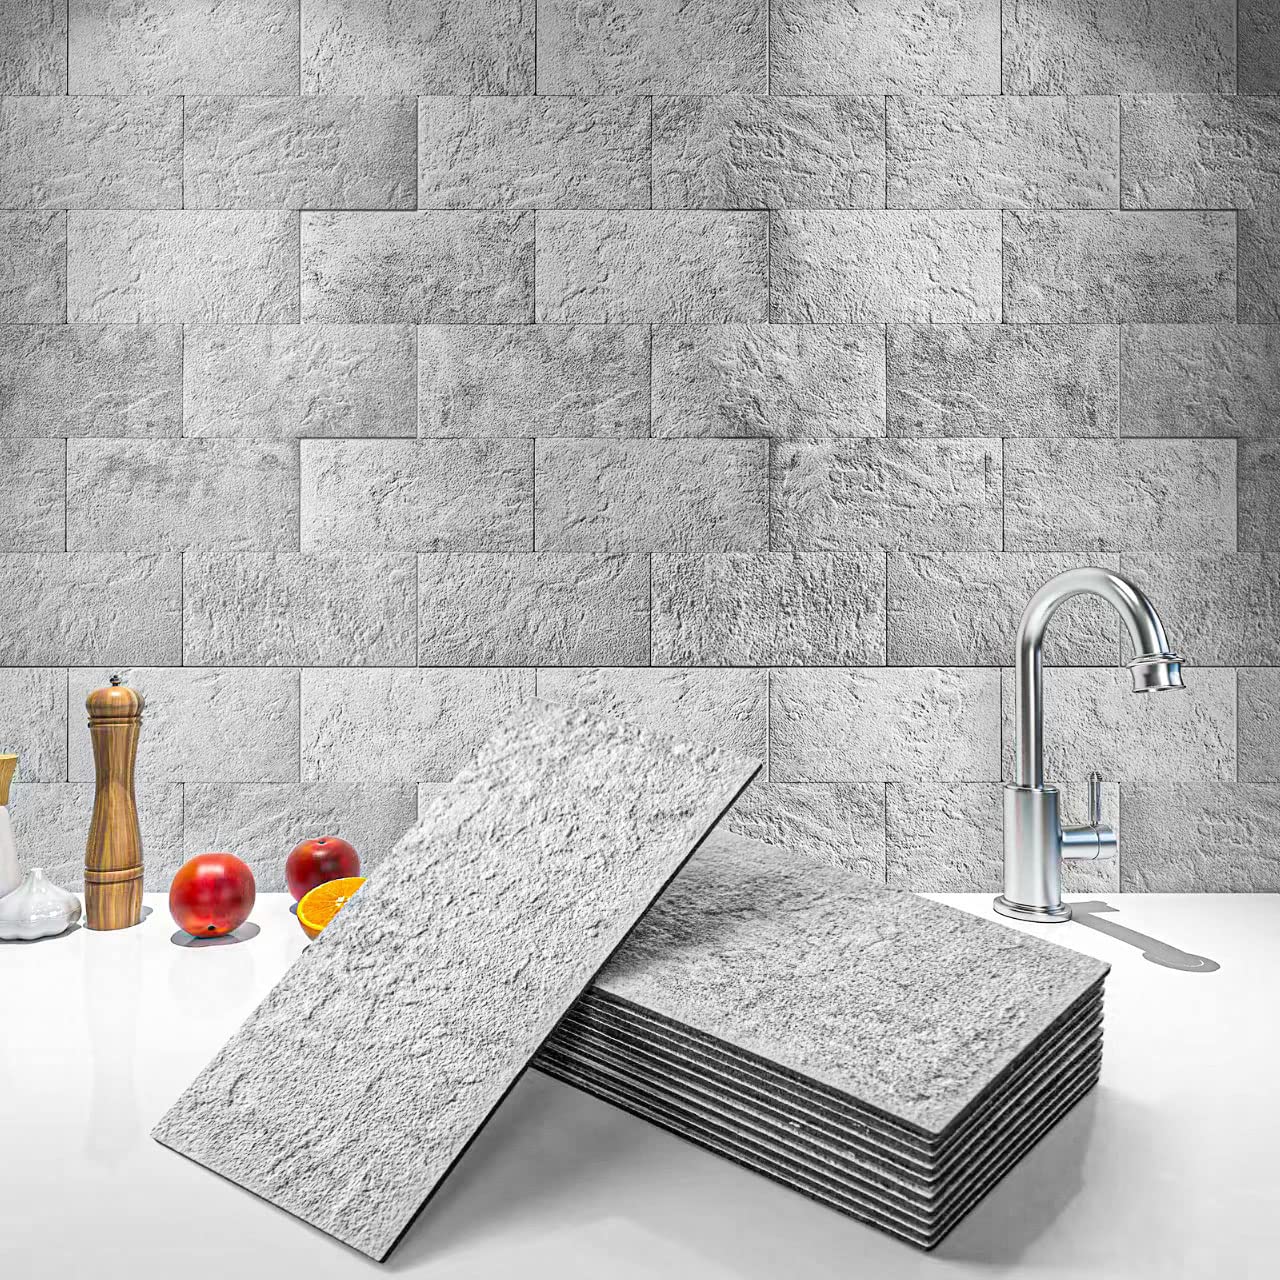 Art3d 102-Piece Backsplash Tile Peel and Stick for Stove Kitchen Bathroom Fireplace, 3in A 6in Stick on Subway Tile Natural Ston